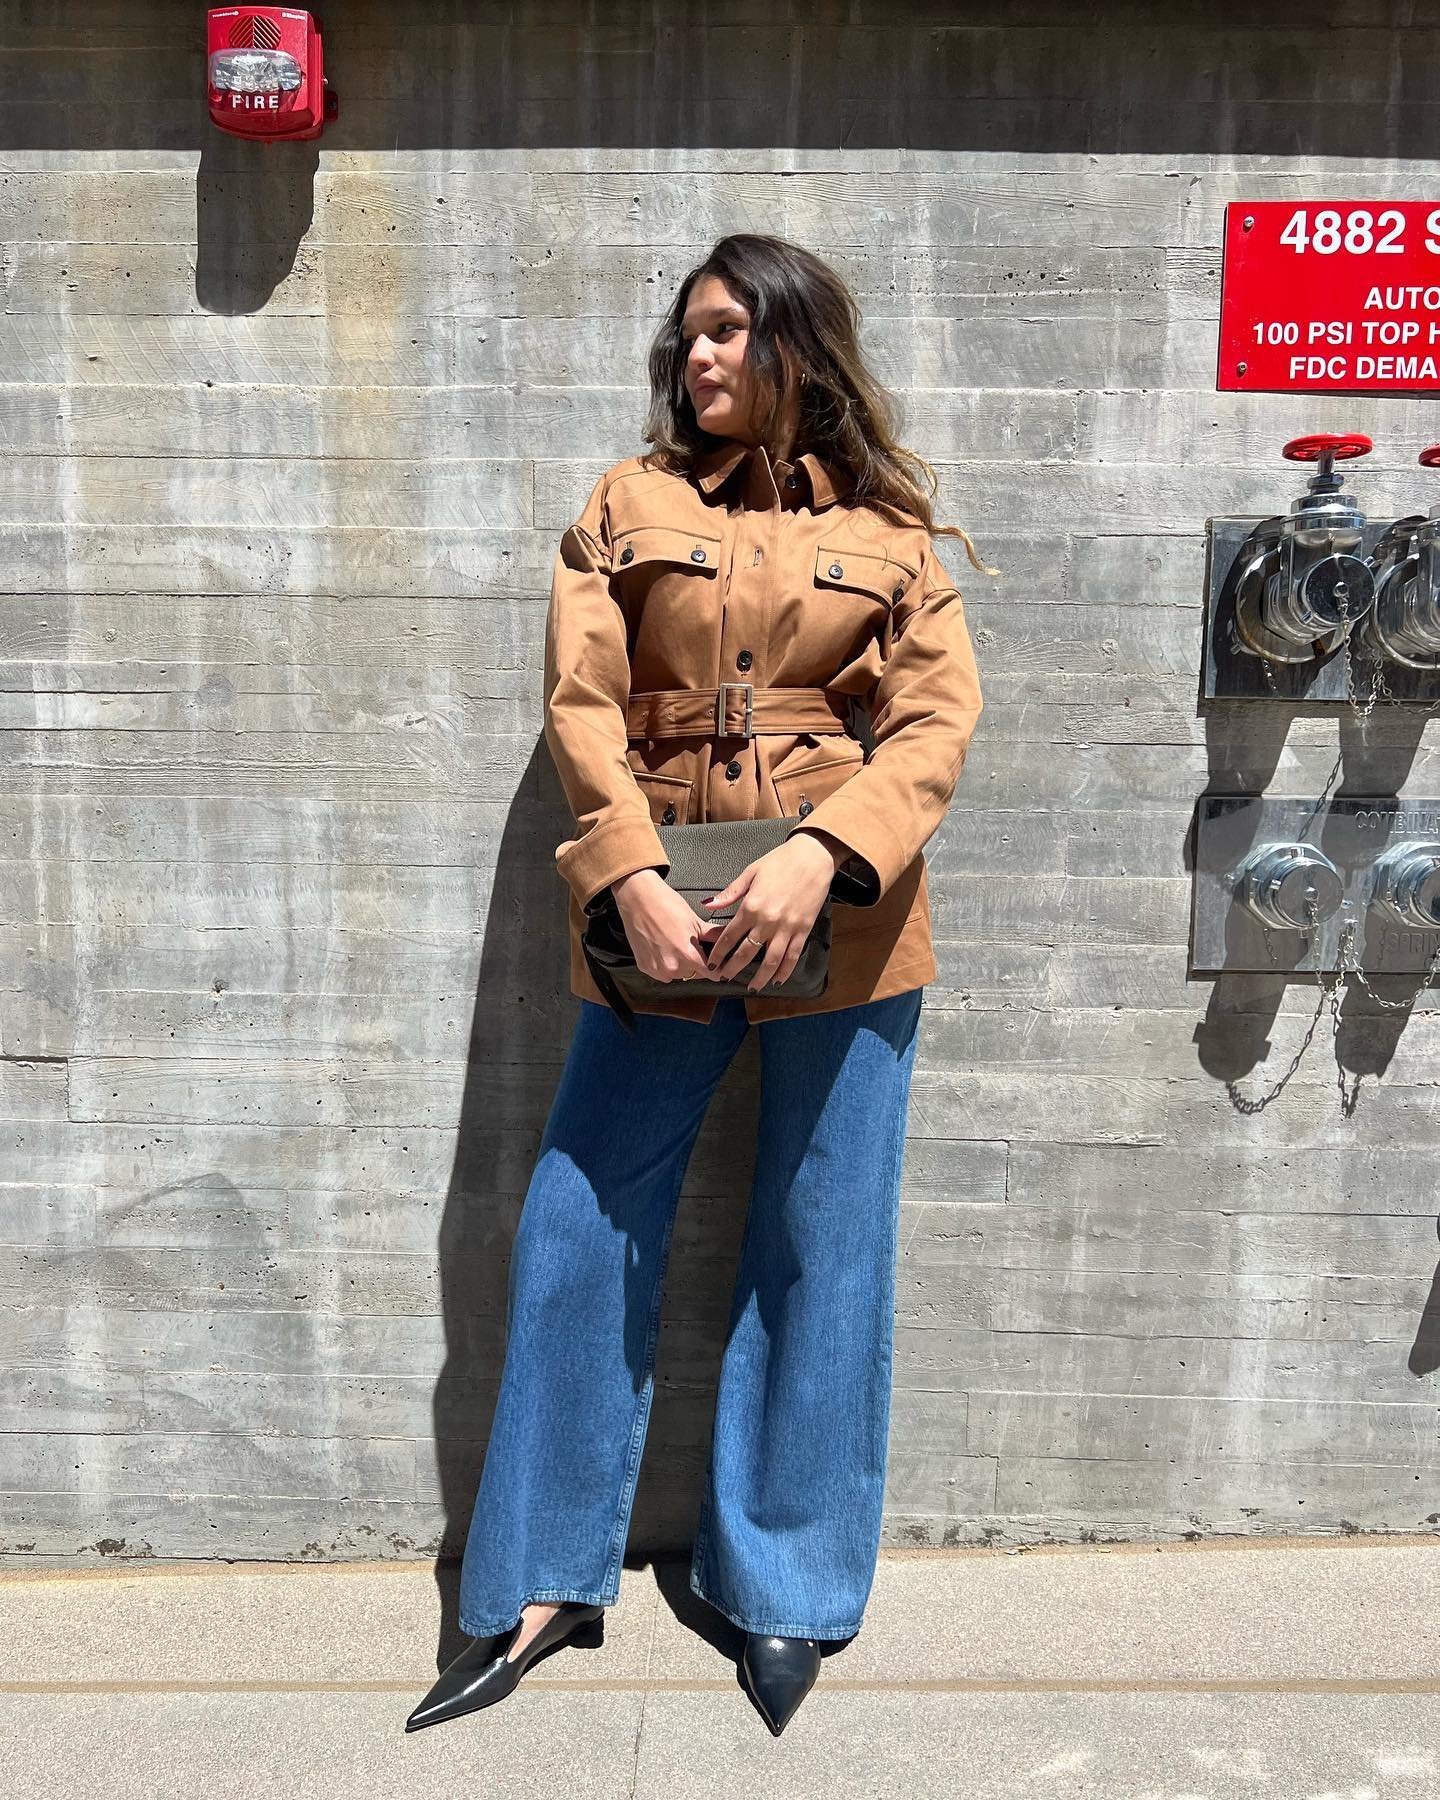 Yves Salomon = perfect layering for spring weather

We&rsquo;ll be open tomorrow - Saturday for all of your spring wardrobe needs. Stop in 10-6!

Special thank you to our gorgeous model (and Proenza brand rep!!) @camilleluna for slaying so many A Lin